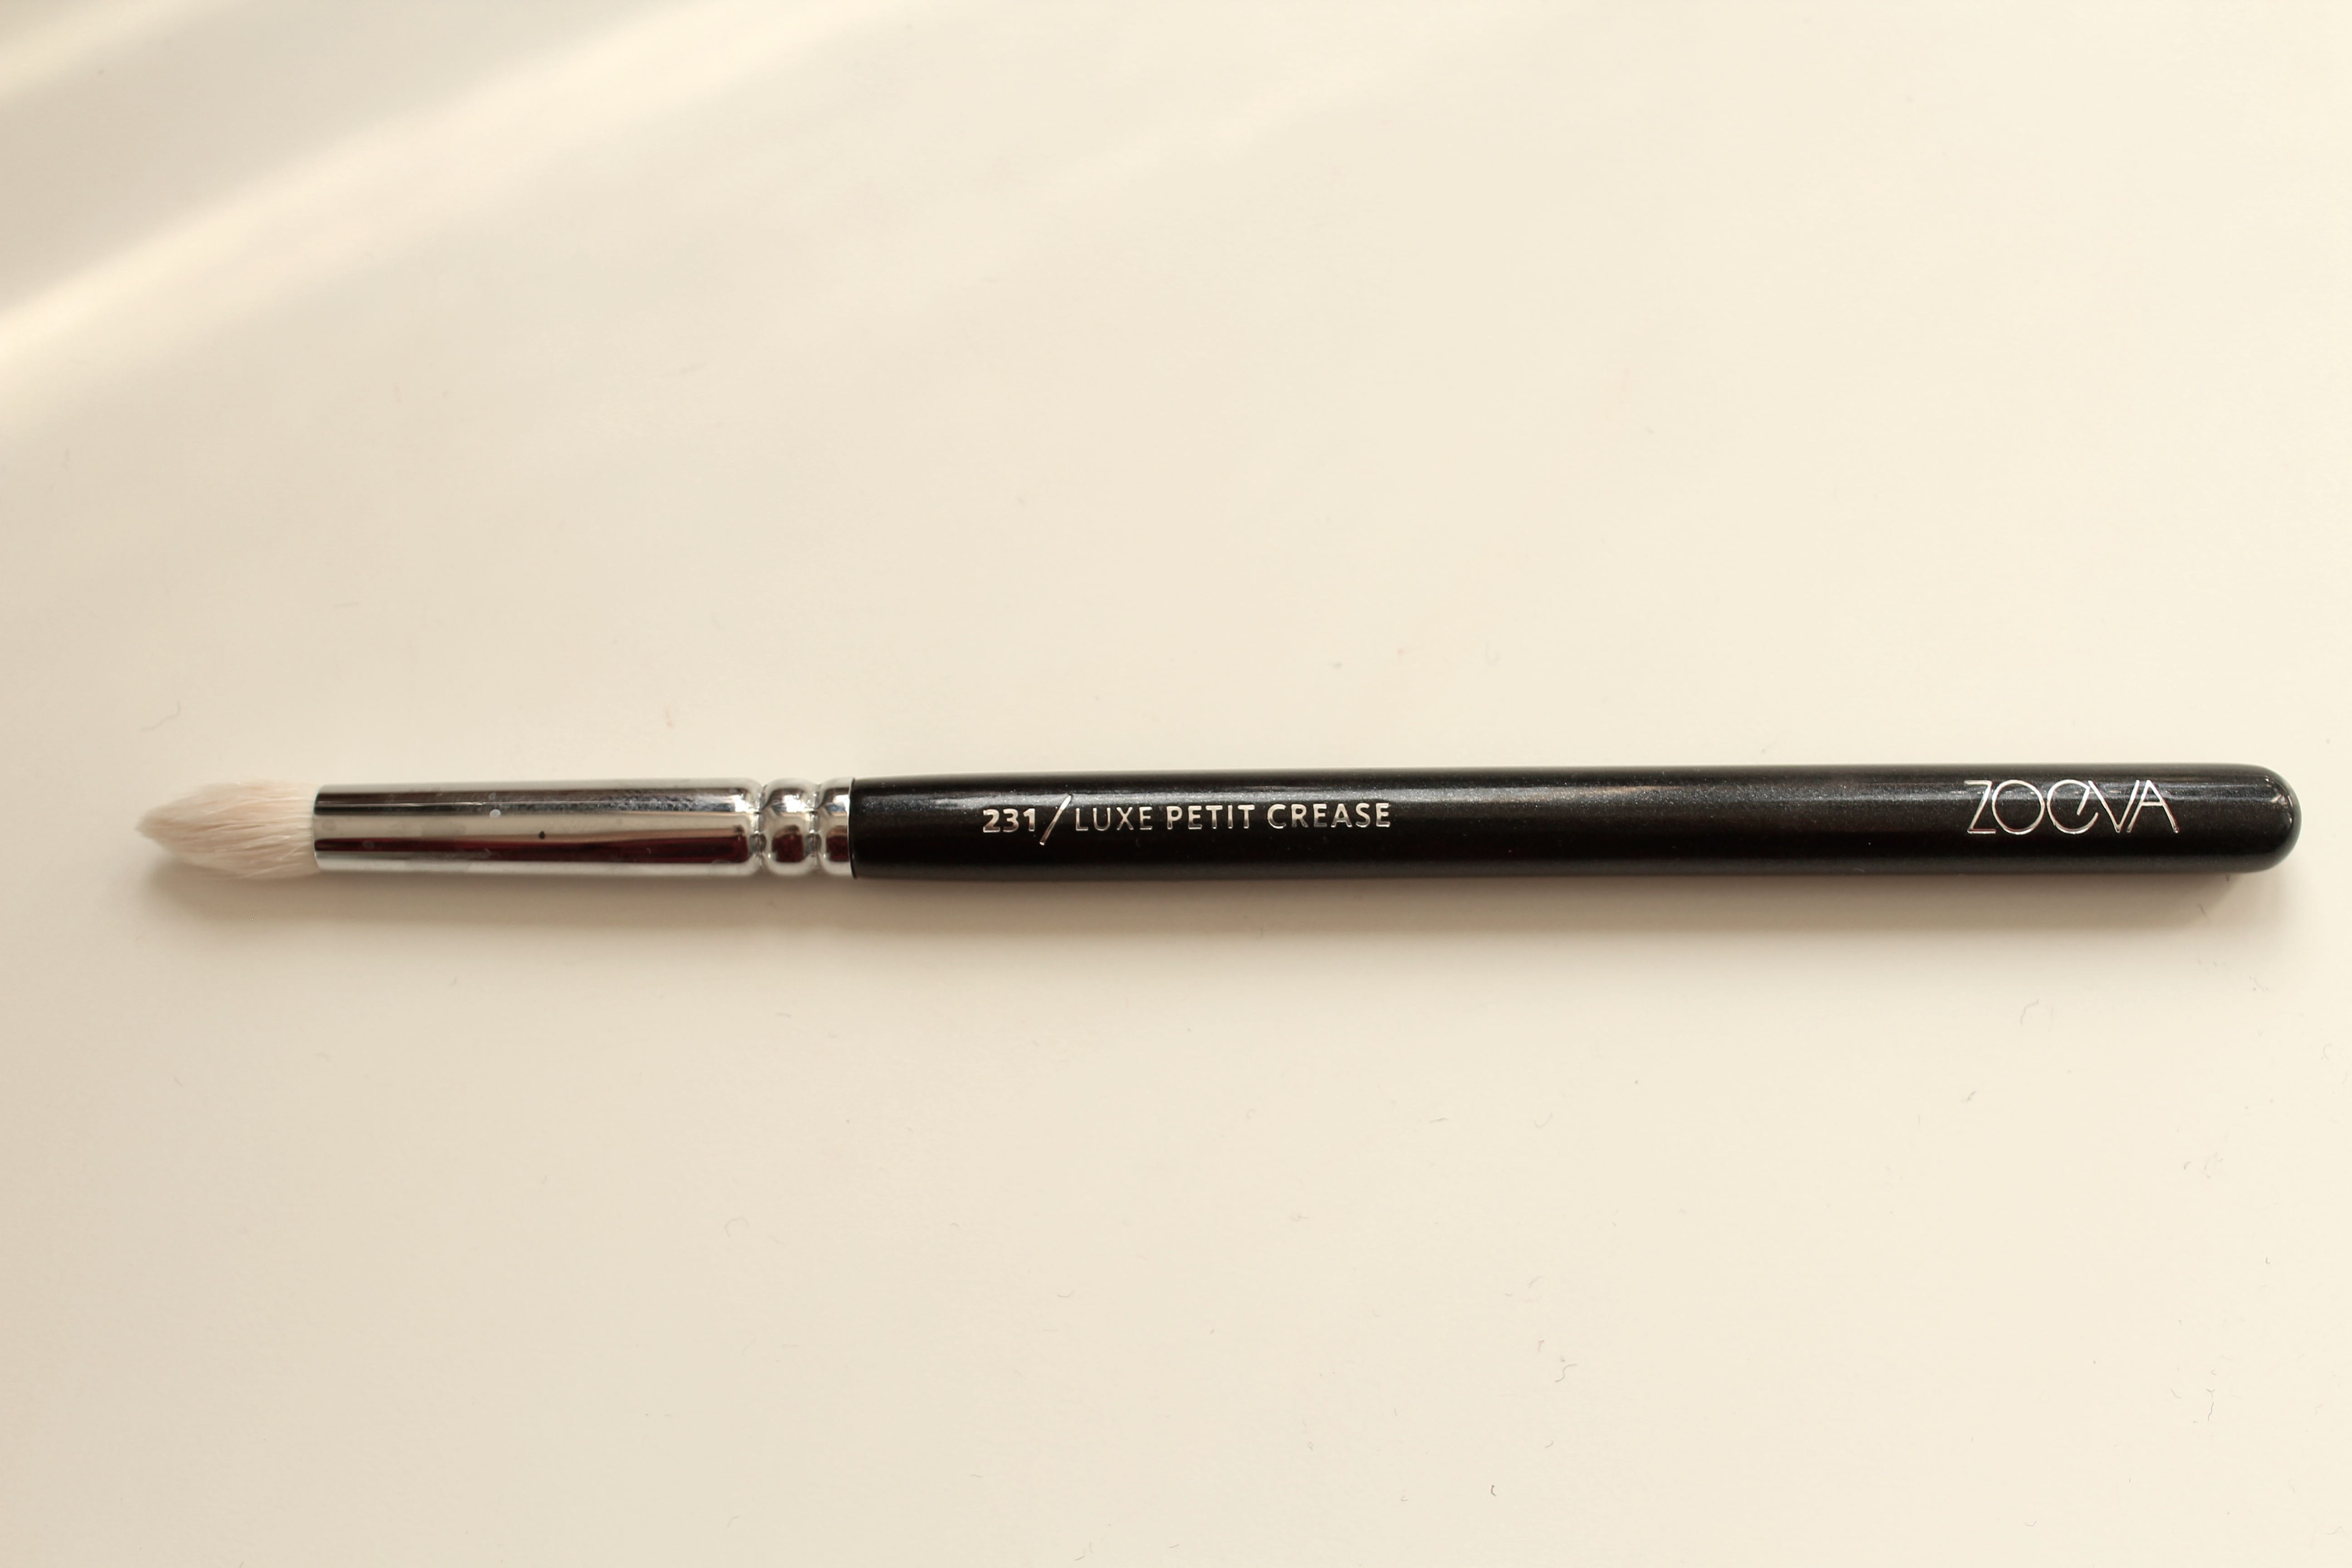 Best 7 Makeup Brushes for Smaller Eyes - Zoeva 231 Petite Luxe Crease Brush by Face Made up